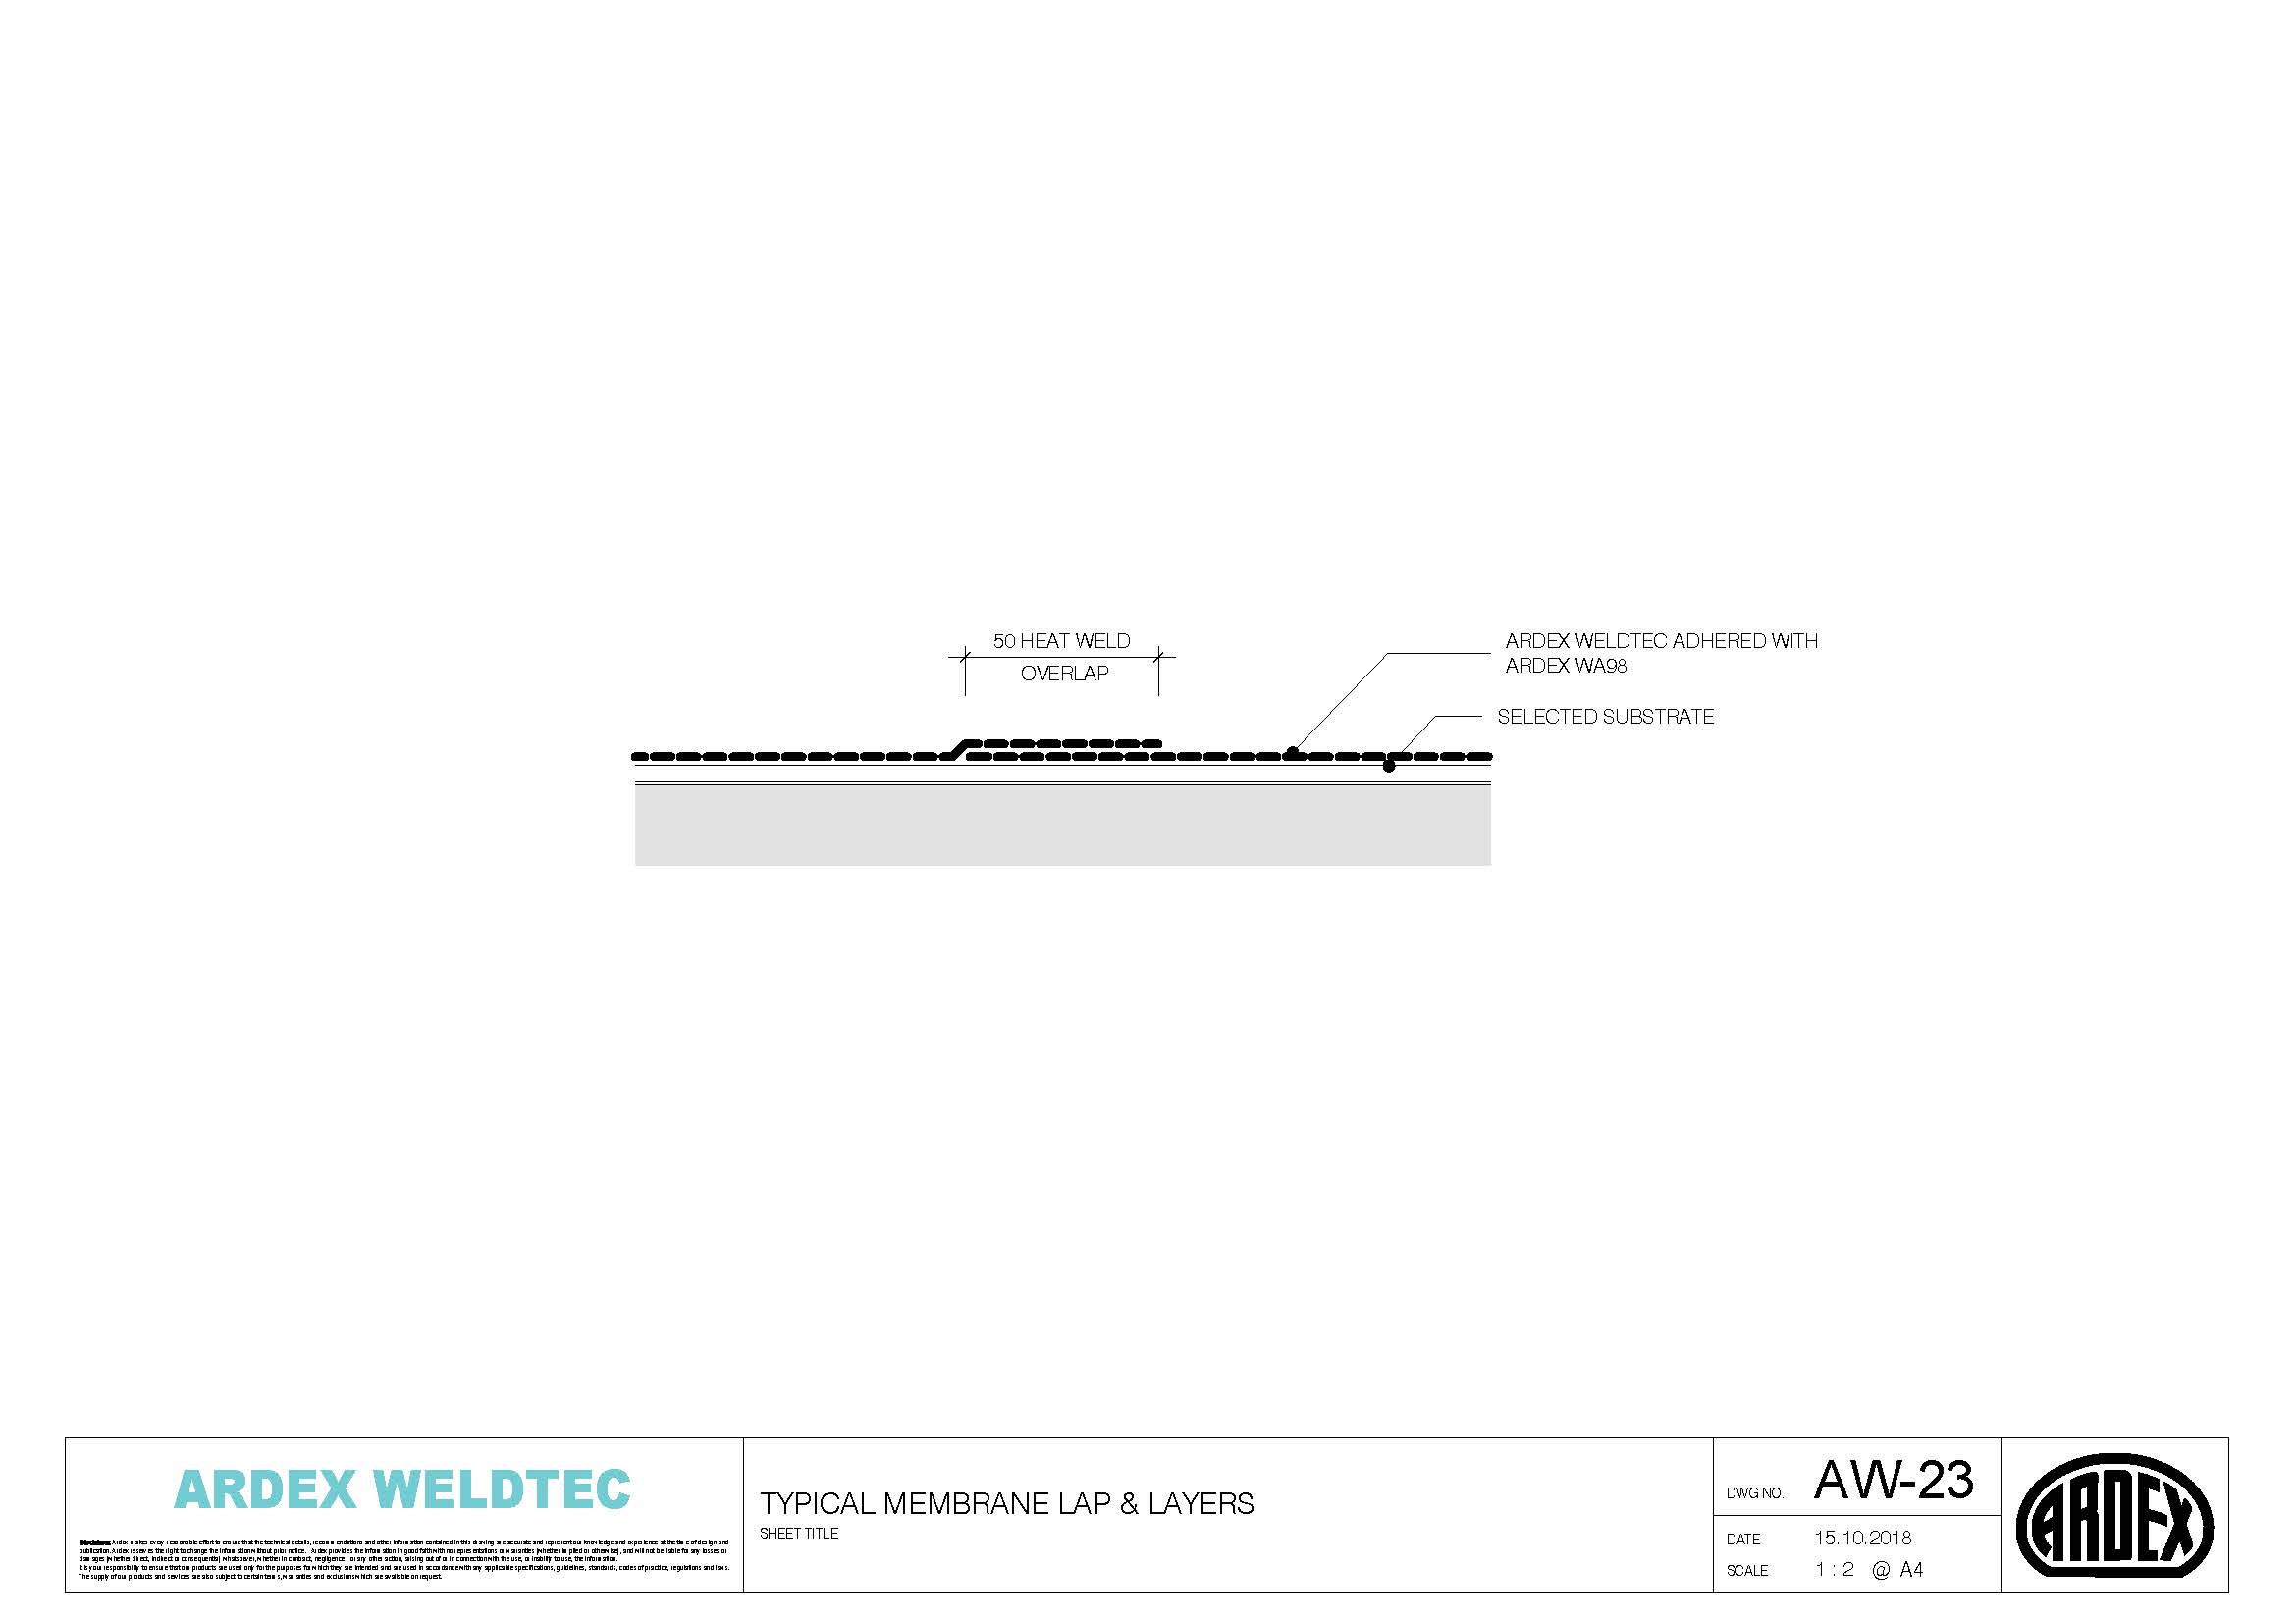 Weldtec typical membrane lap and layers